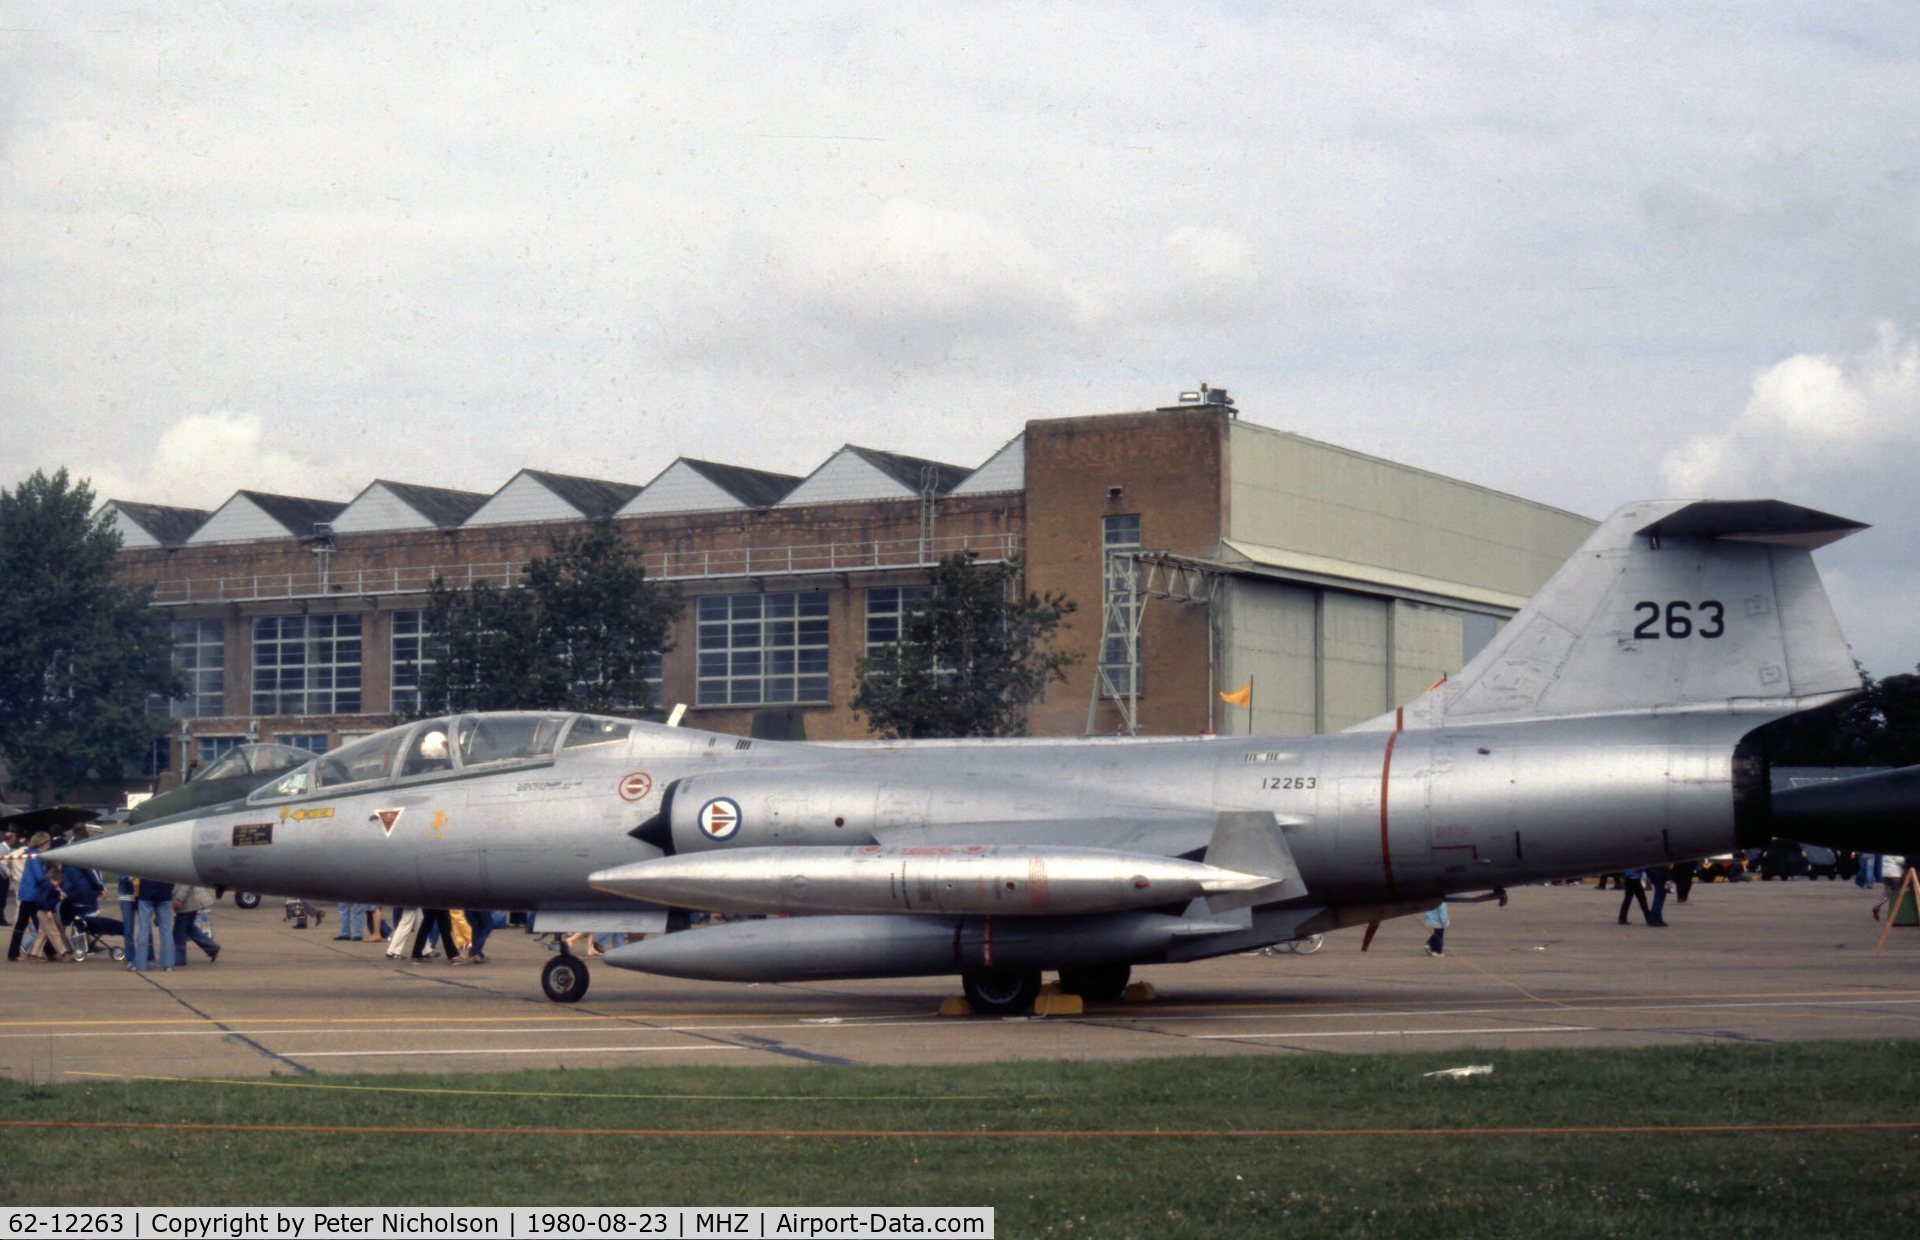 62-12263, 1962 Lockheed TF-104G Starfighter C/N 583C-5508, TF-104G as 12263 of 331 Squadron of the Royal Norwegian Air Force at the 1980 RAF Mildenhall Air Fete.